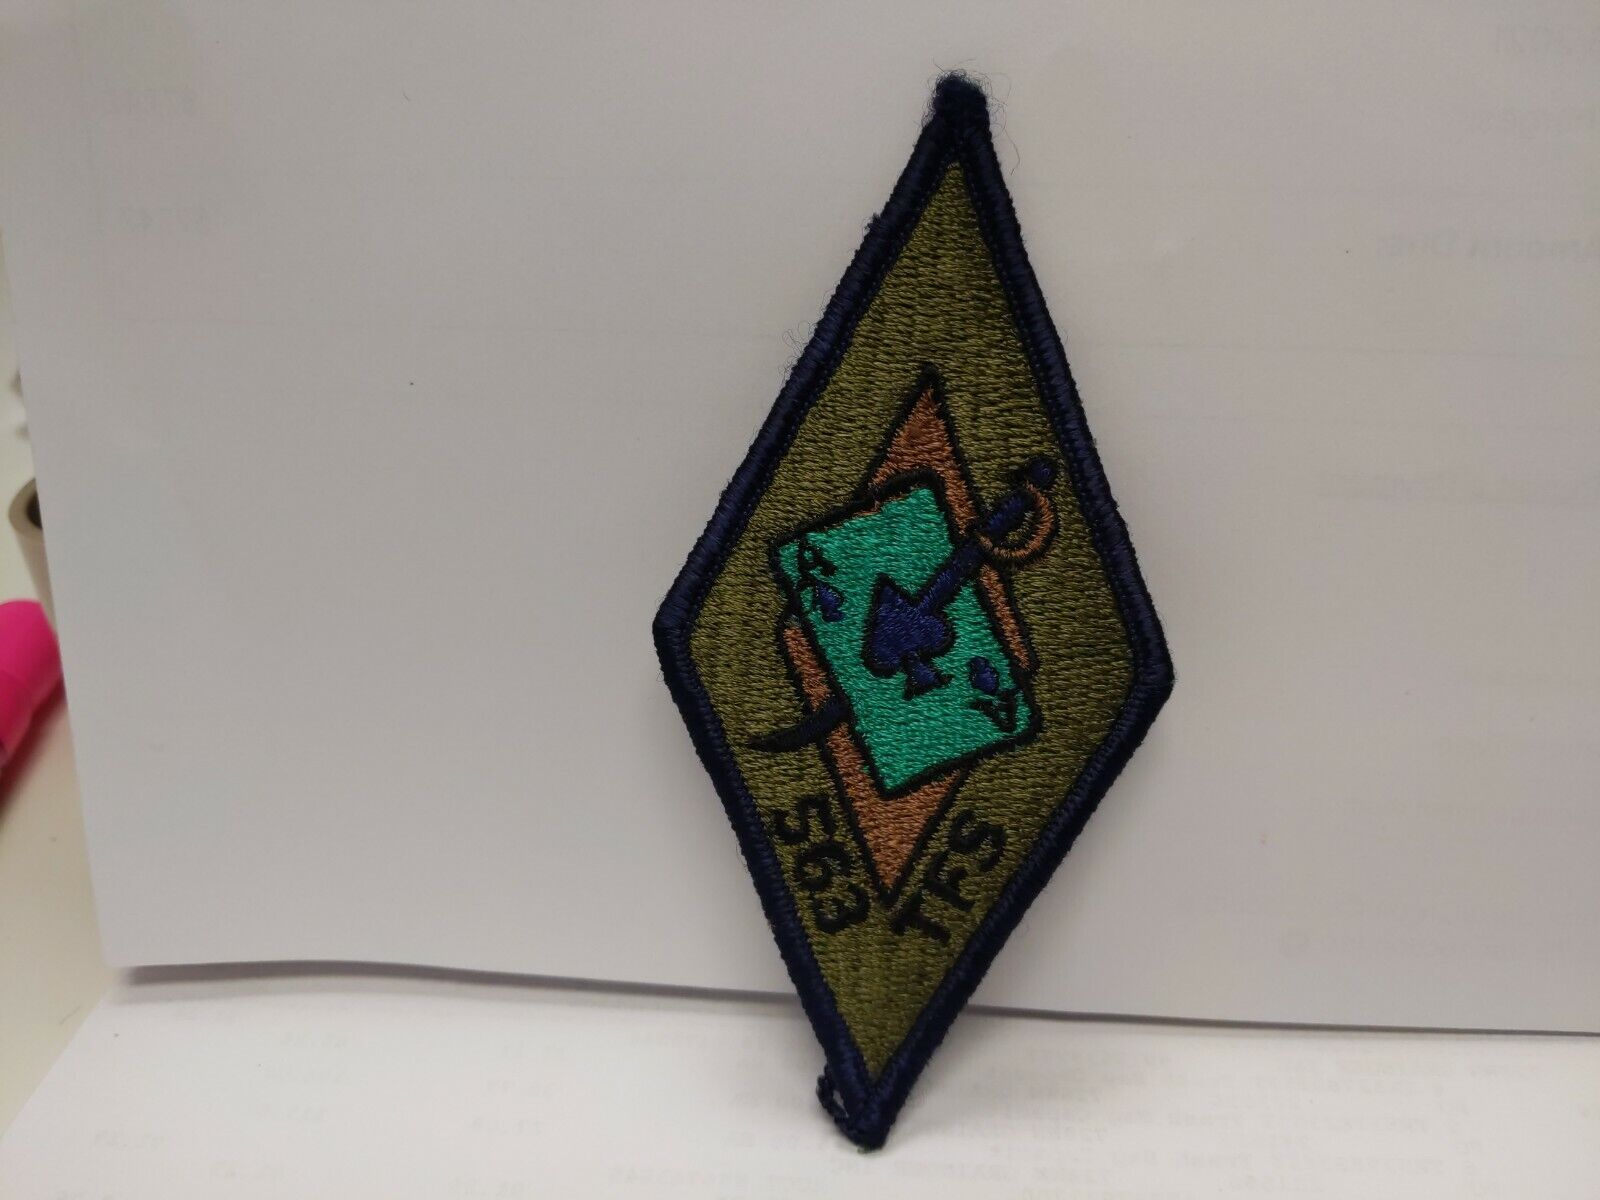 USAF 563rd TACTICAL FIGHTER SQUADRON PATCH 5 x 2 1/2 inches